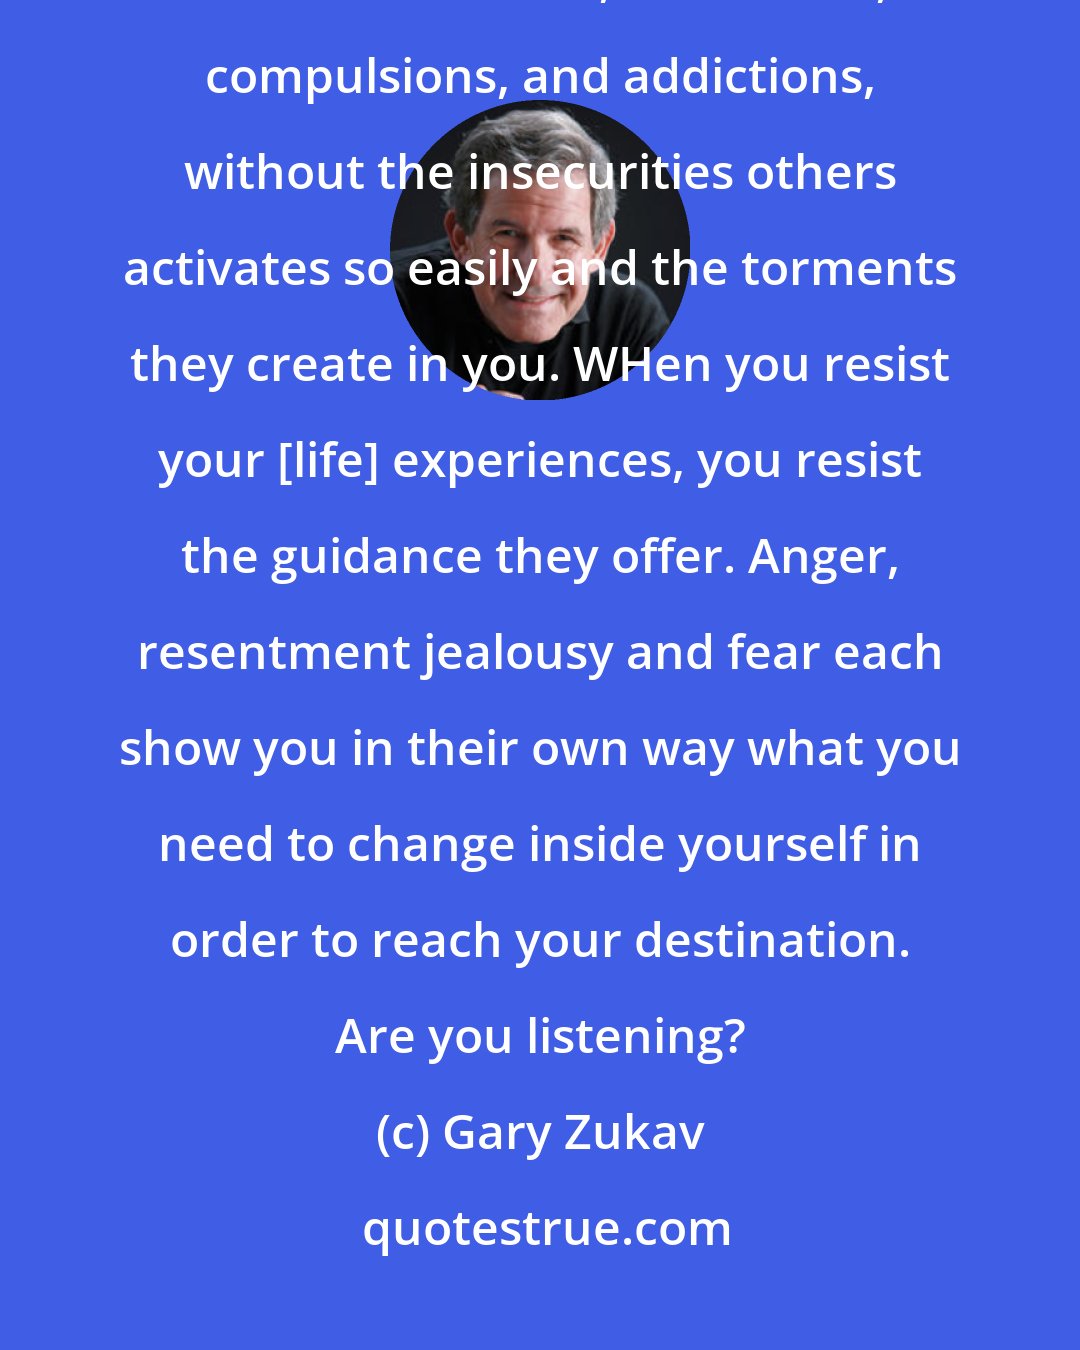 Gary Zukav: Your desintation is a life of meaning, fulfillment, creativity and joy. A life free of fears, obsessions, compulsions, and addictions, without the insecurities others activates so easily and the torments they create in you. WHen you resist your [life] experiences, you resist the guidance they offer. Anger, resentment jealousy and fear each show you in their own way what you need to change inside yourself in order to reach your destination. Are you listening?